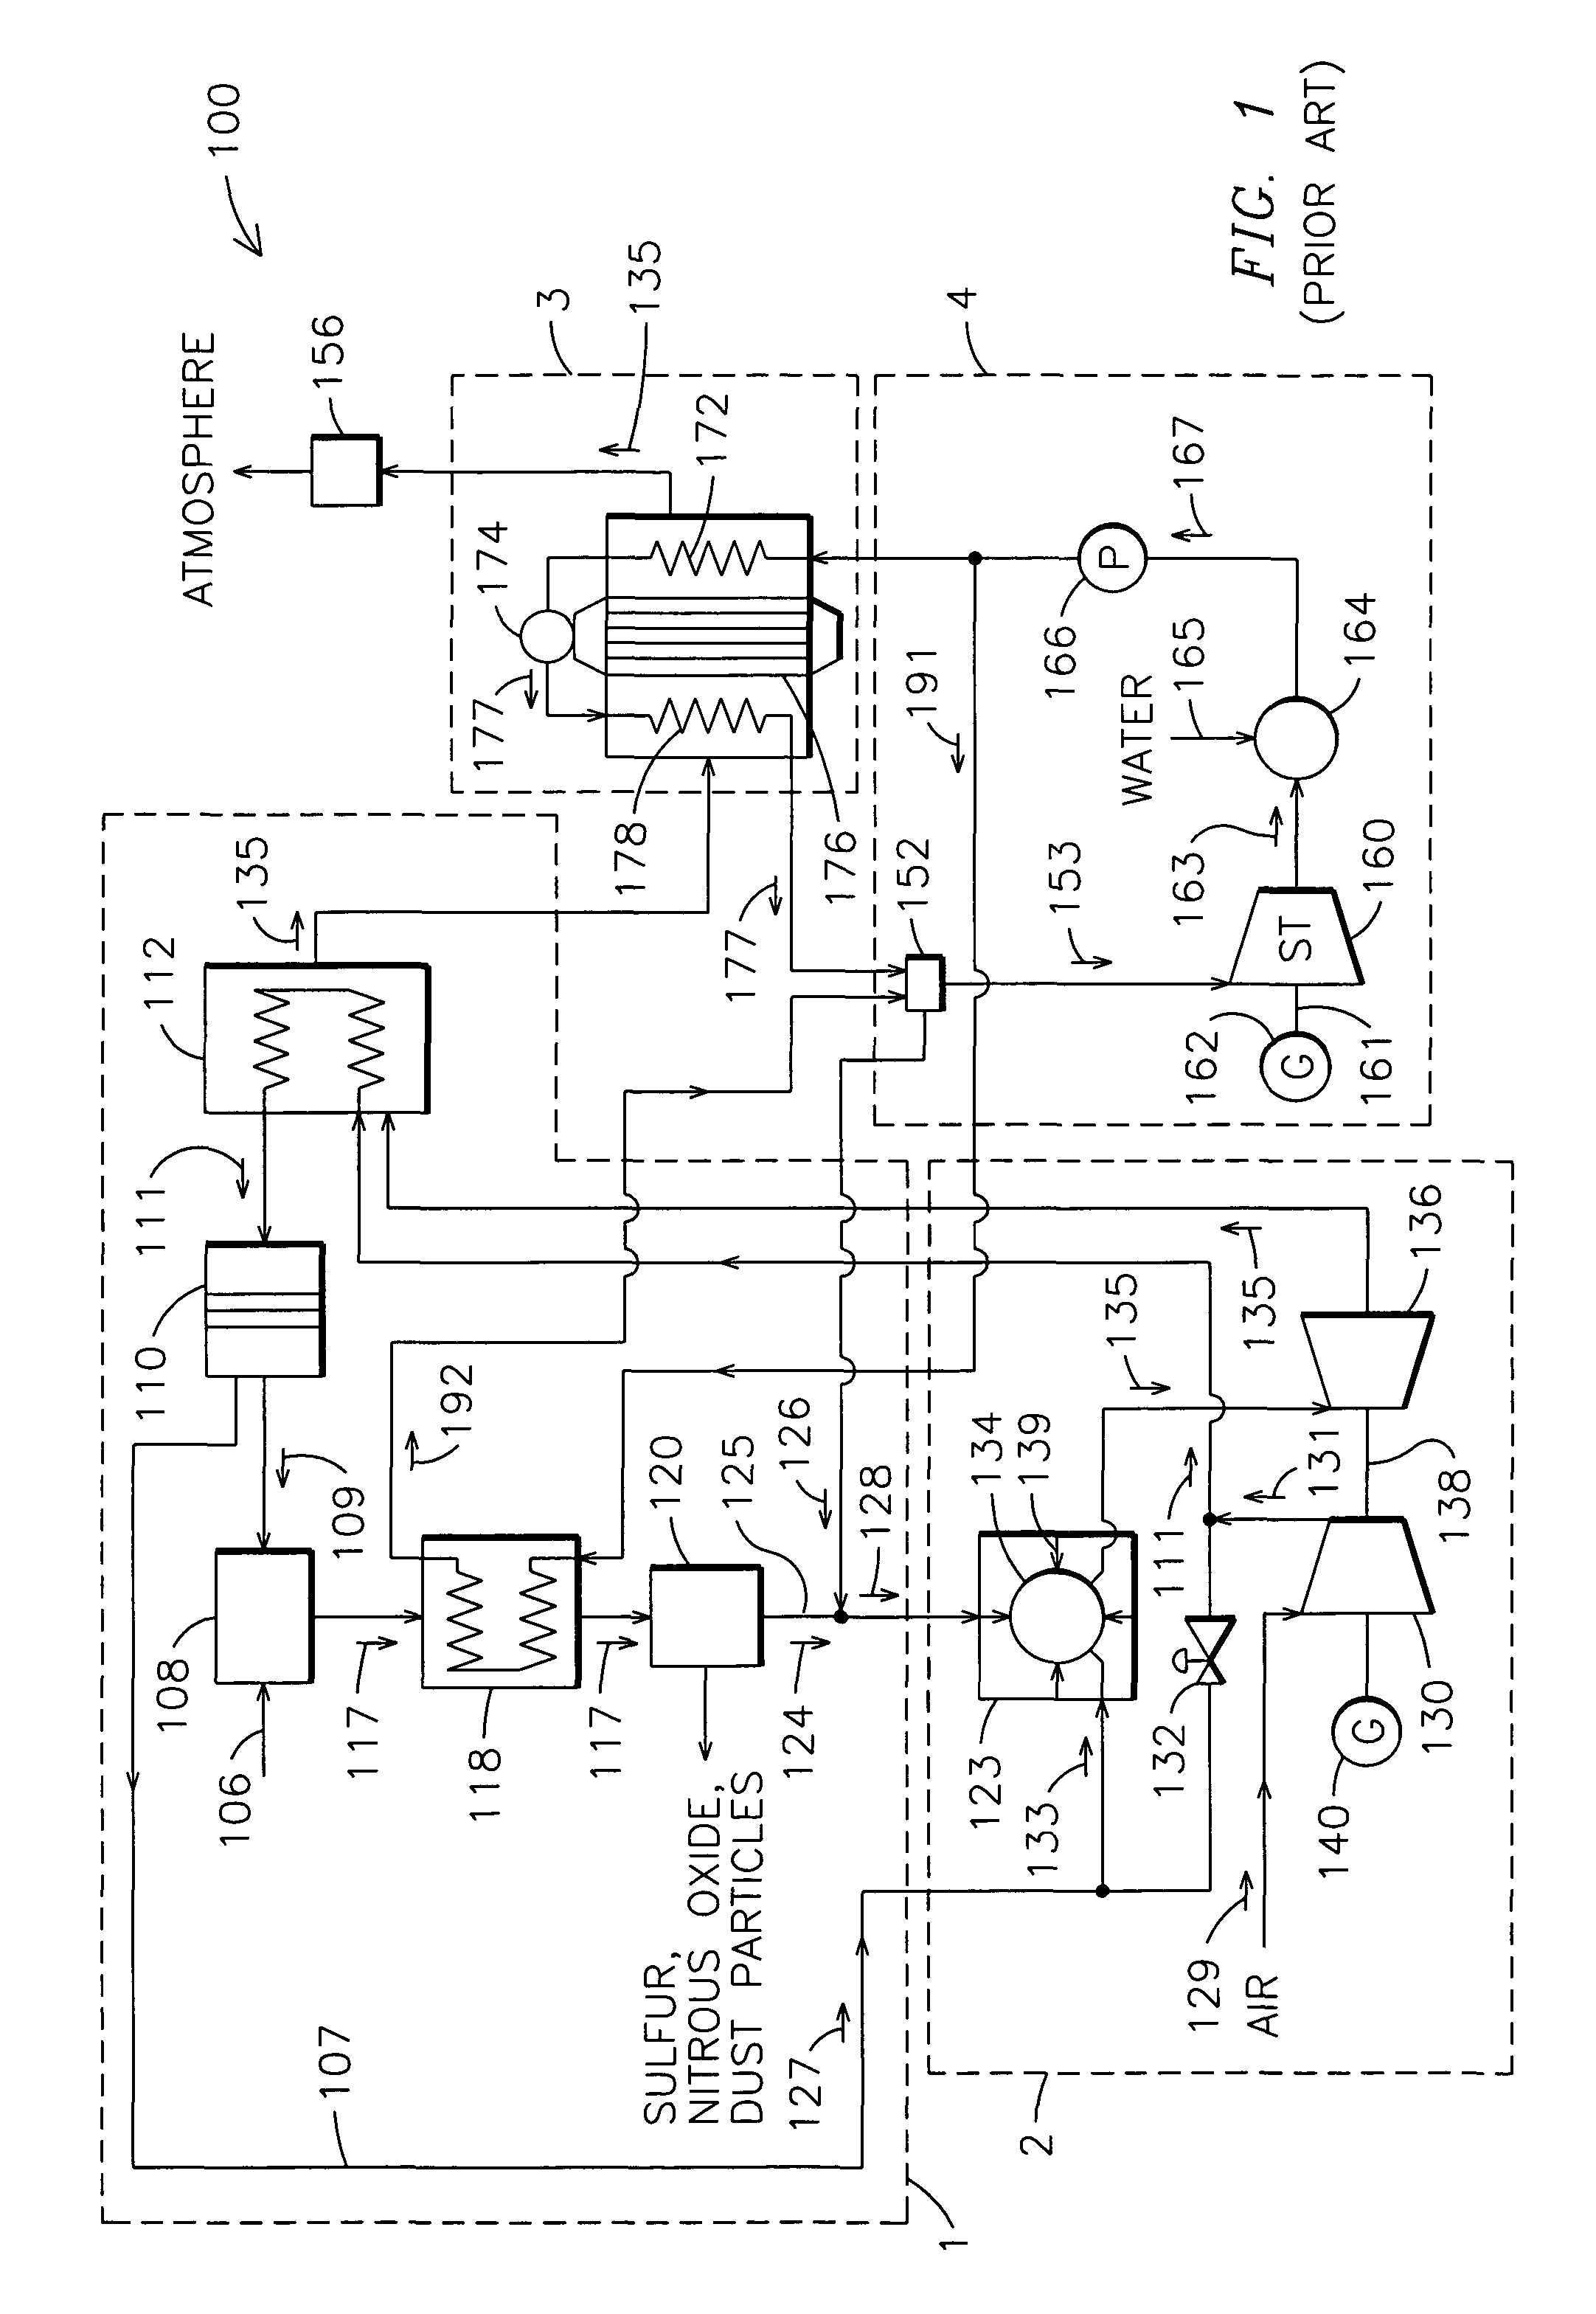 System and method for generation of high pressure air in an integrated gasification combined cycle system